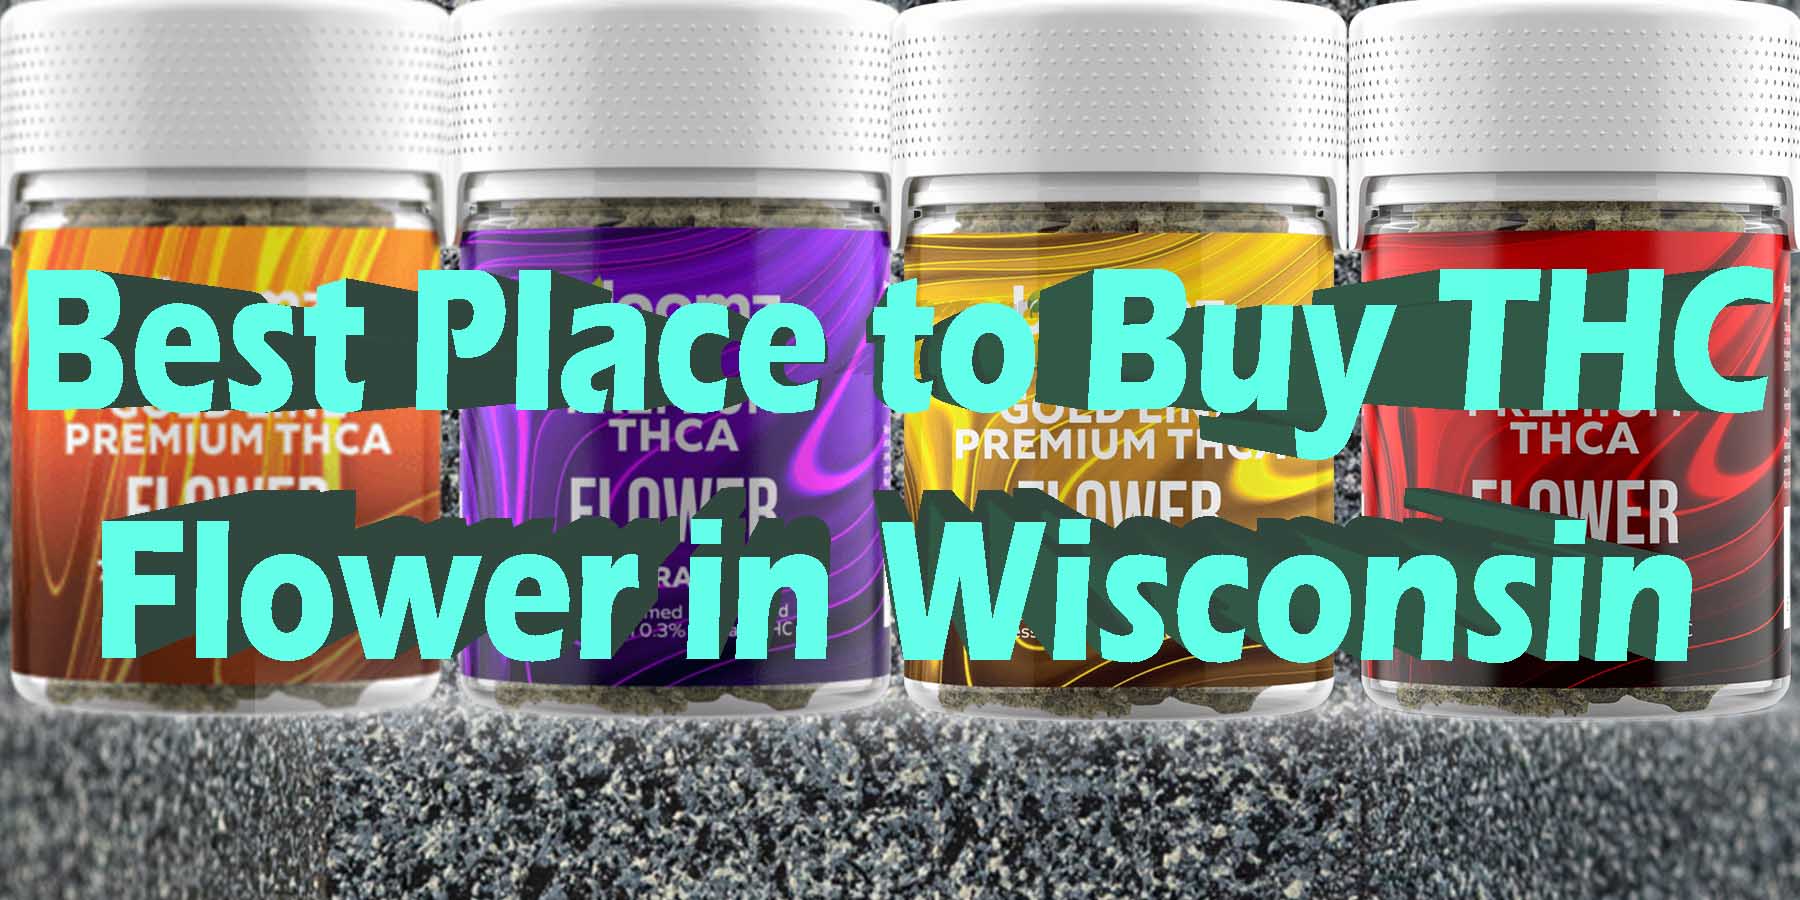 Best Place to Buy THC Flower in Wisconsin HowToGetNearMe BestPlace LowestPrice Coupon Discount For Smoking High Smoke Shop Online Near Me Strongest Binoid.